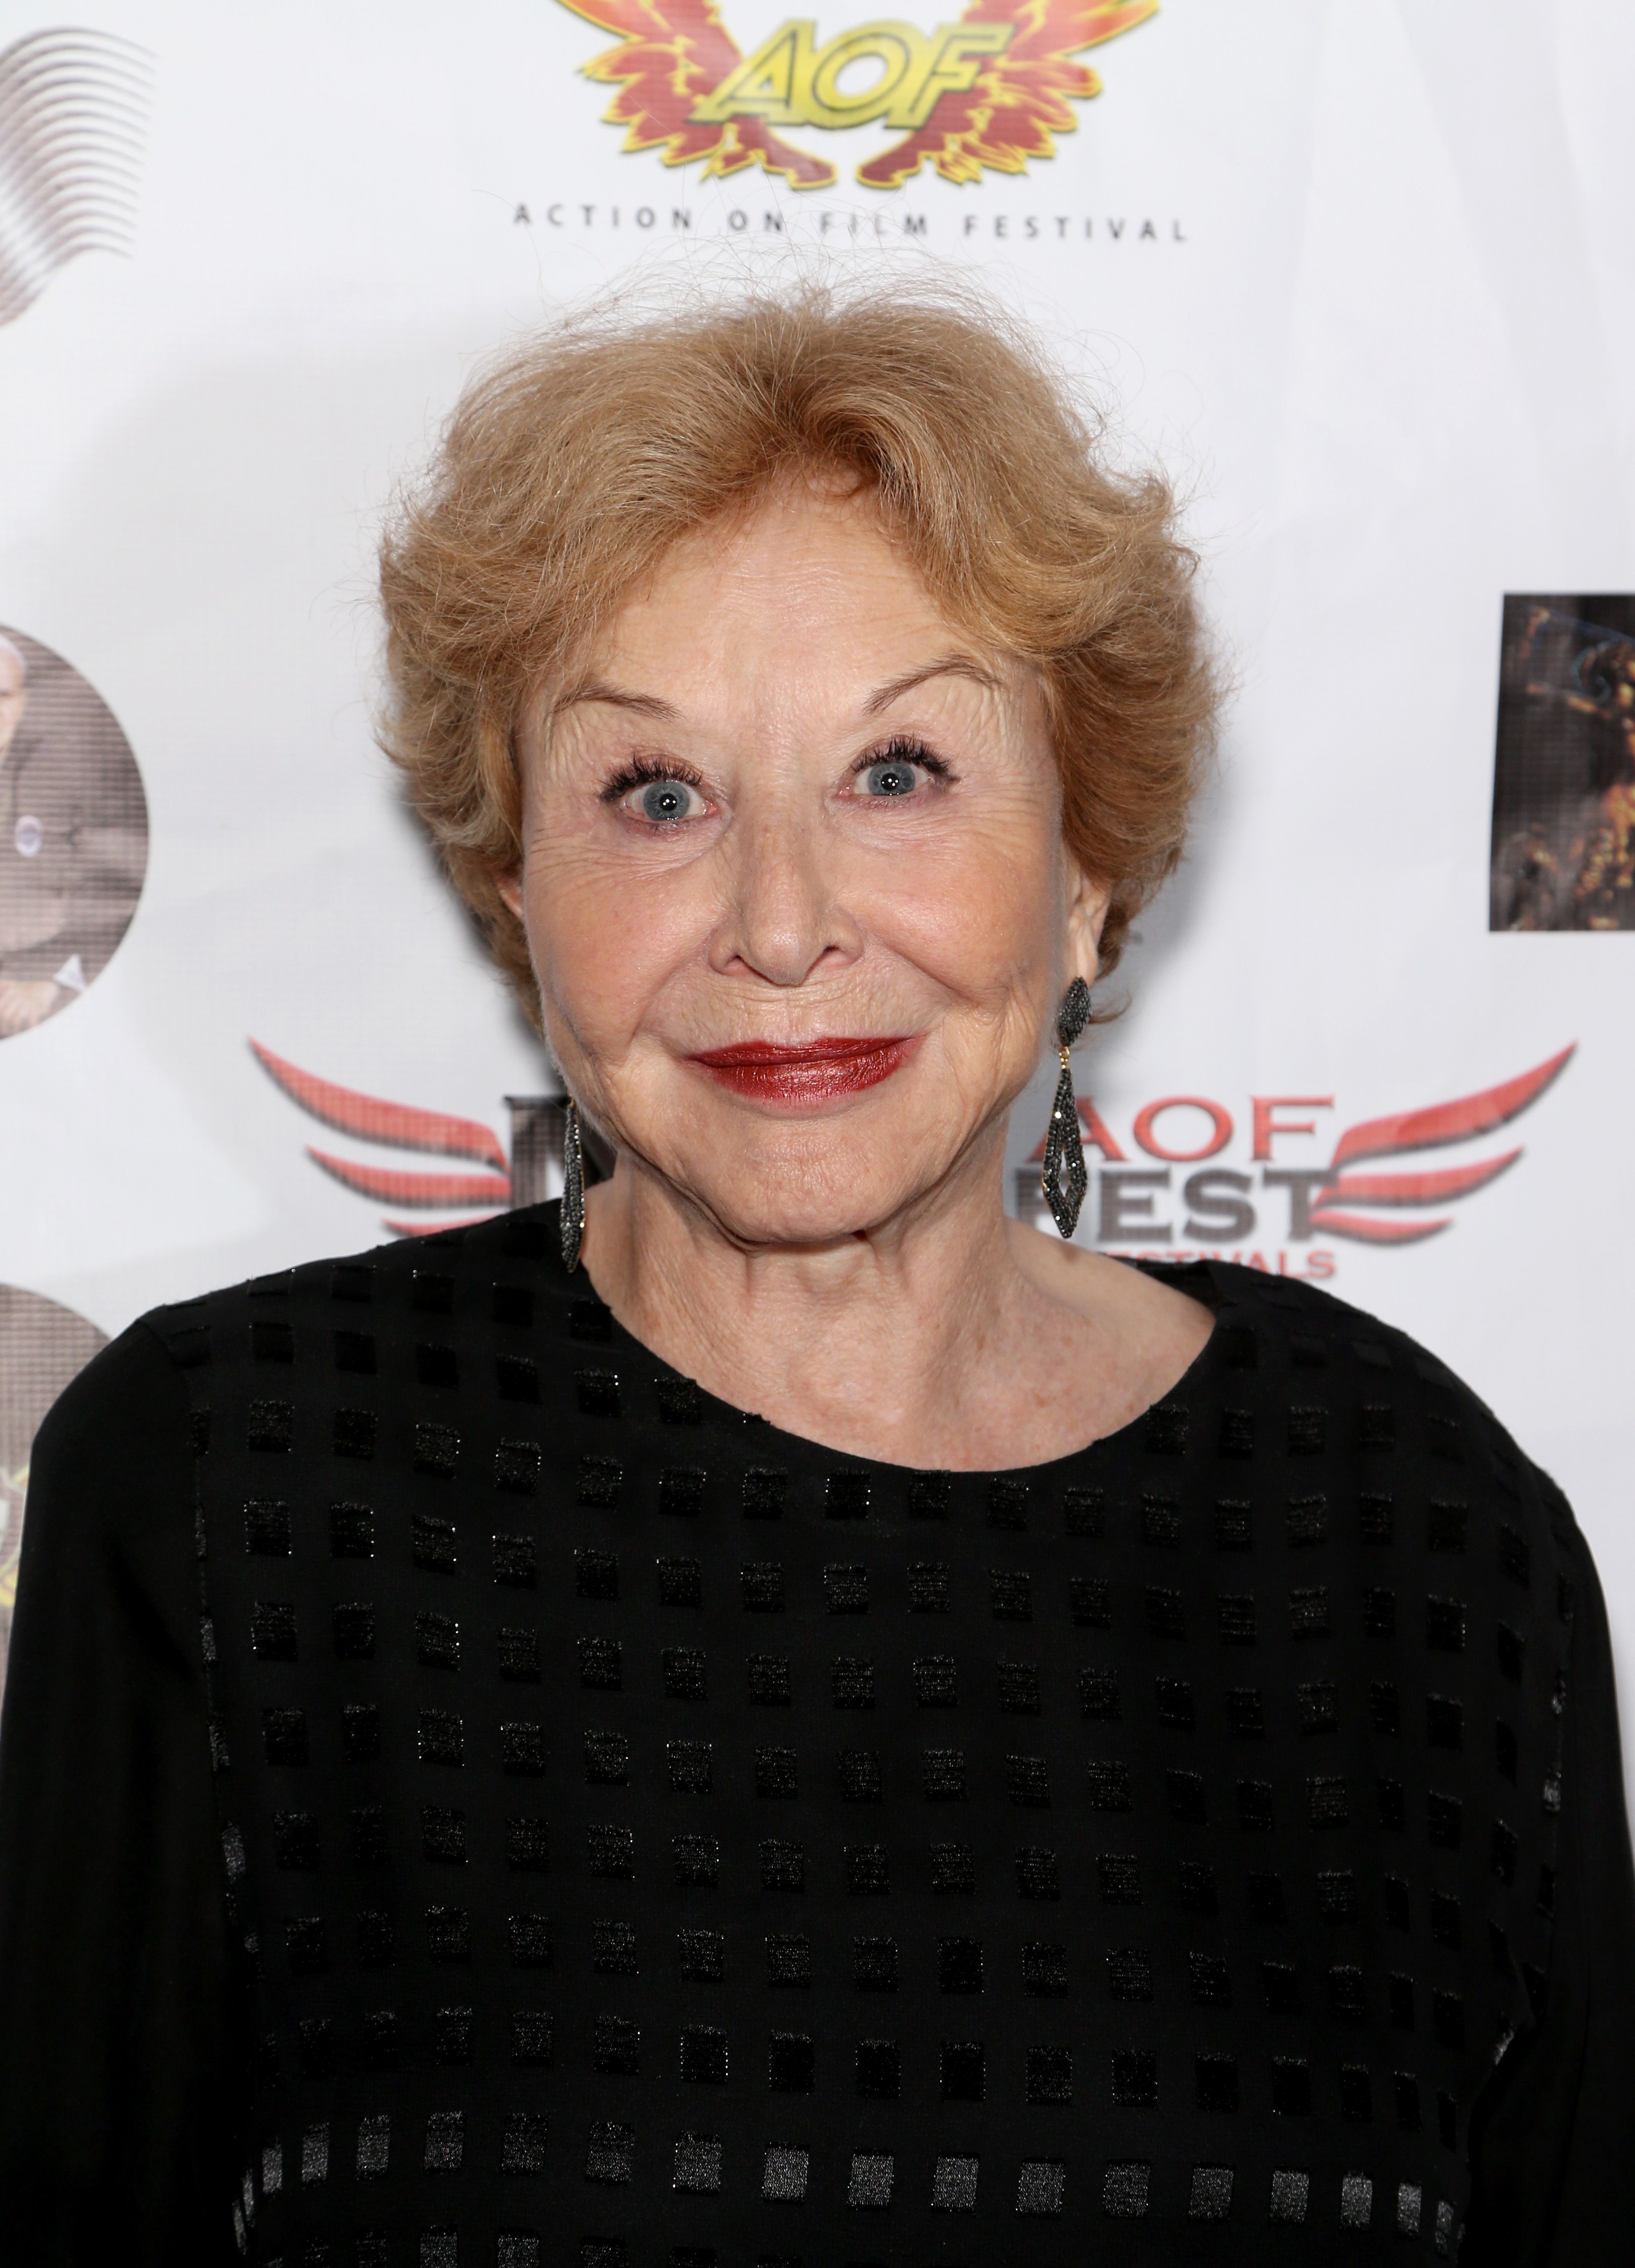 Michael Learned during the Action on Film MEGAFest International Film Festival at the Rio Hotel & Casino on August 3, 2019 in Las Vegas, Nevada. | Photo: Getty Images